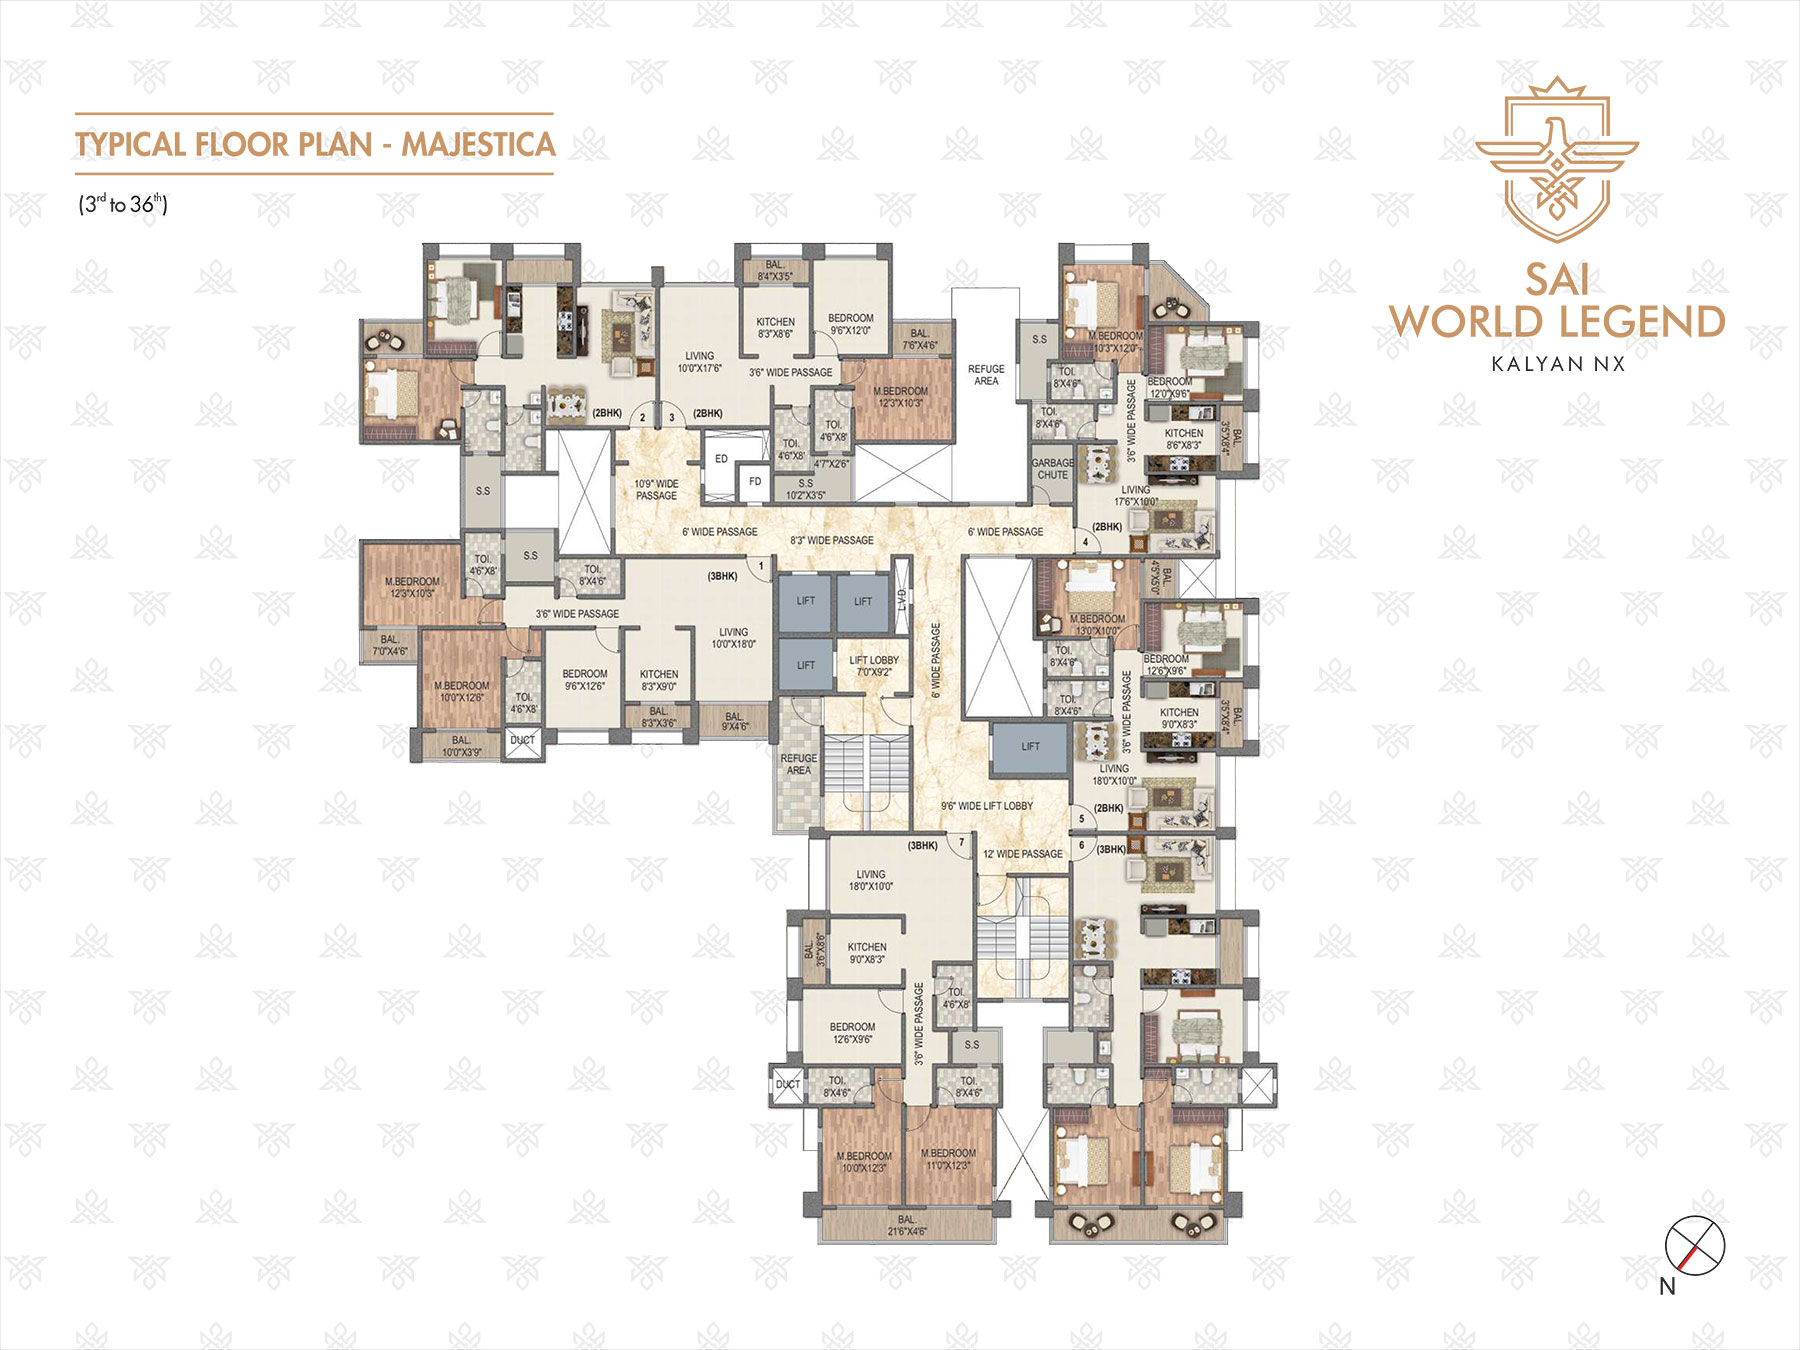 TYPICAL FLOOR PLAN MAJESTICA 3rd to 36th